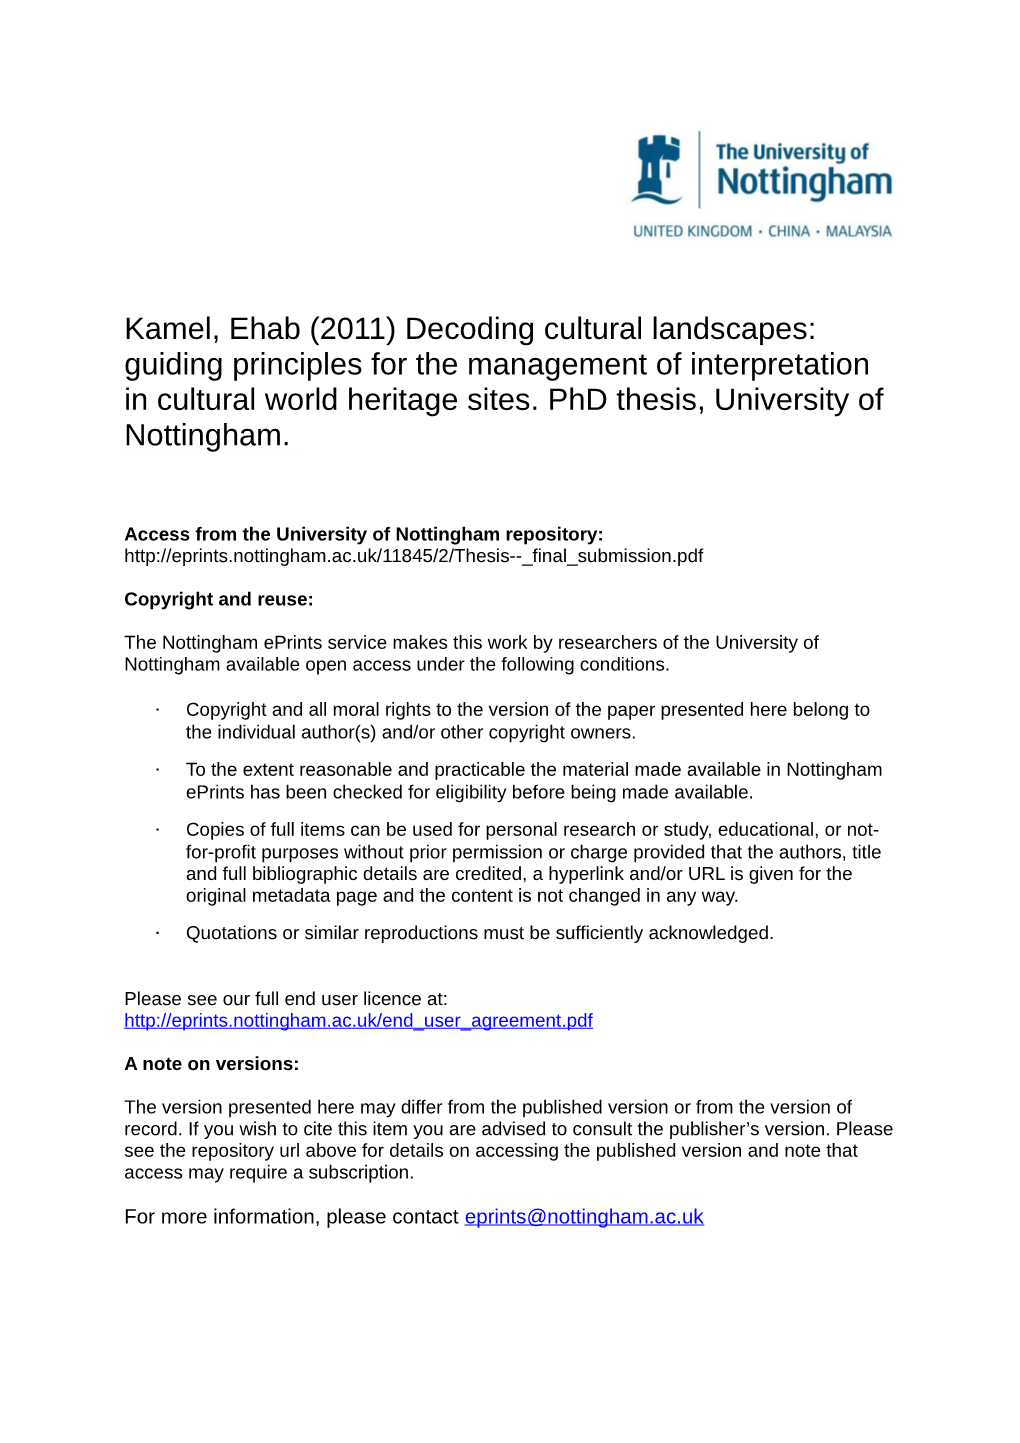 Guiding Principles for the Management of Interpretation in Cultural World Heritage Sites